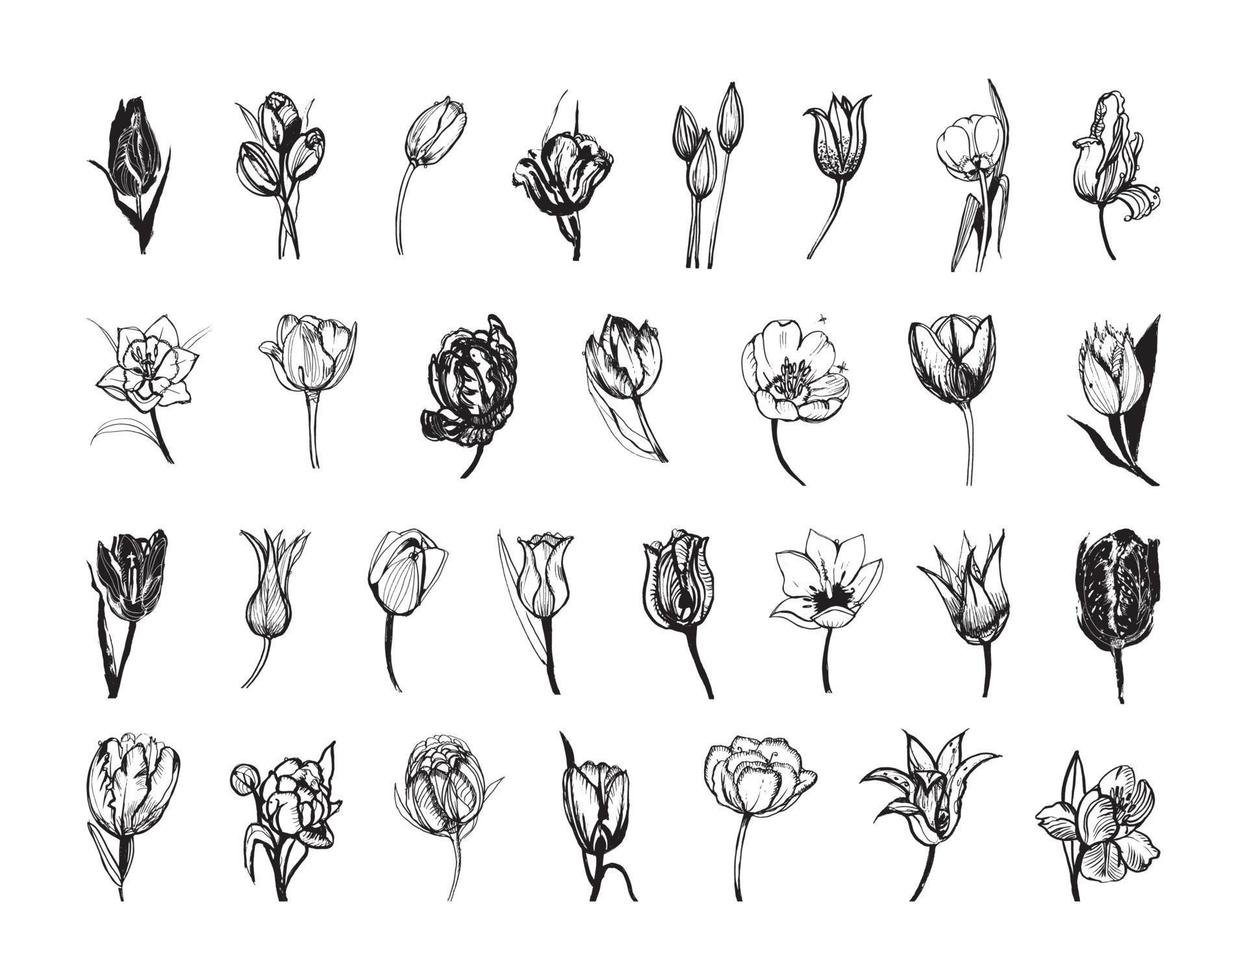 Tulip Illustrations in Art Ink Style vector